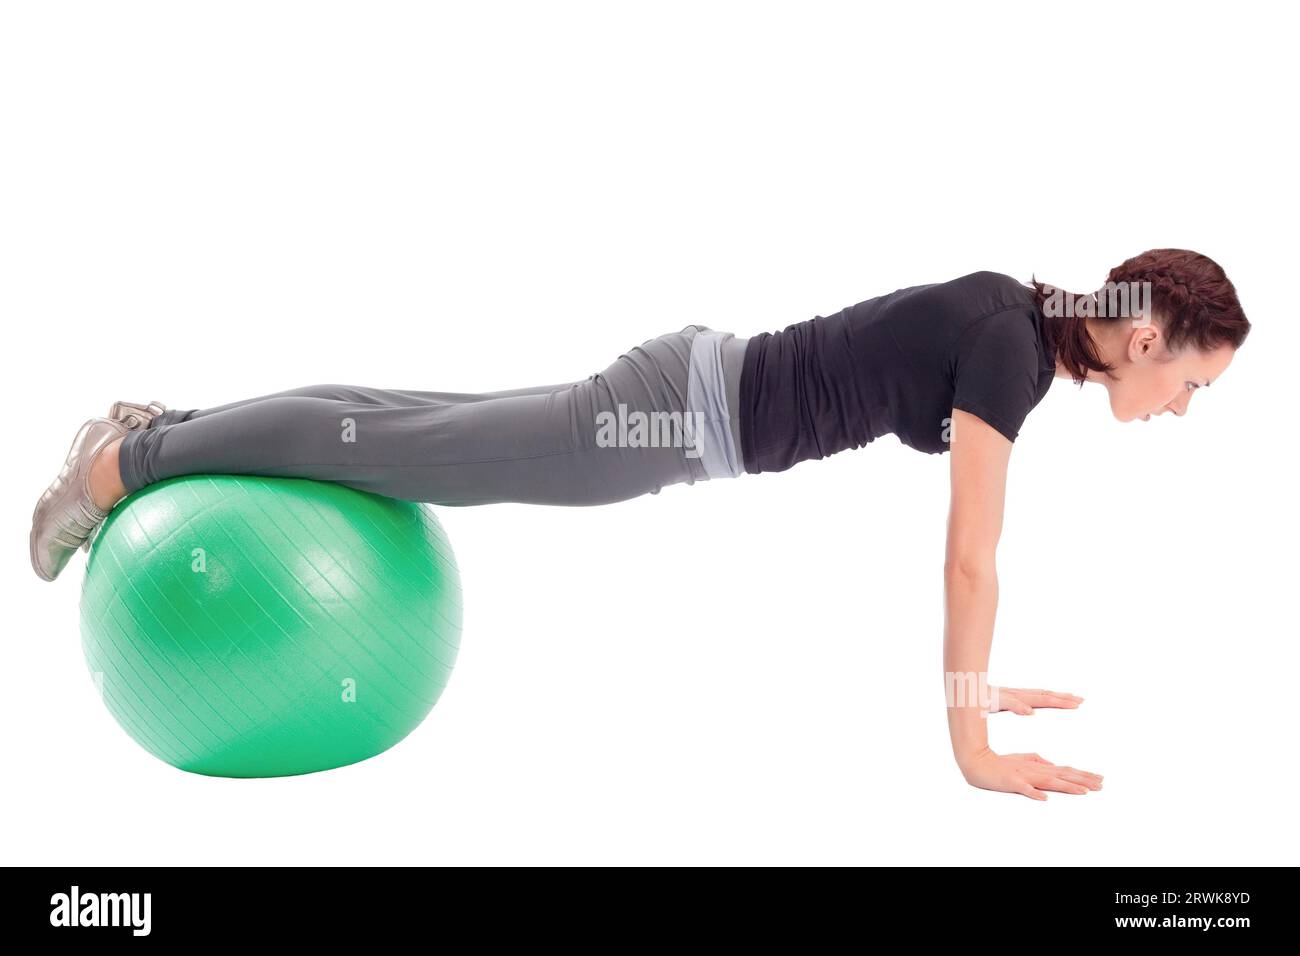 Young woman with gym ball doing pushup exercise, isolated on white background Stock Photo